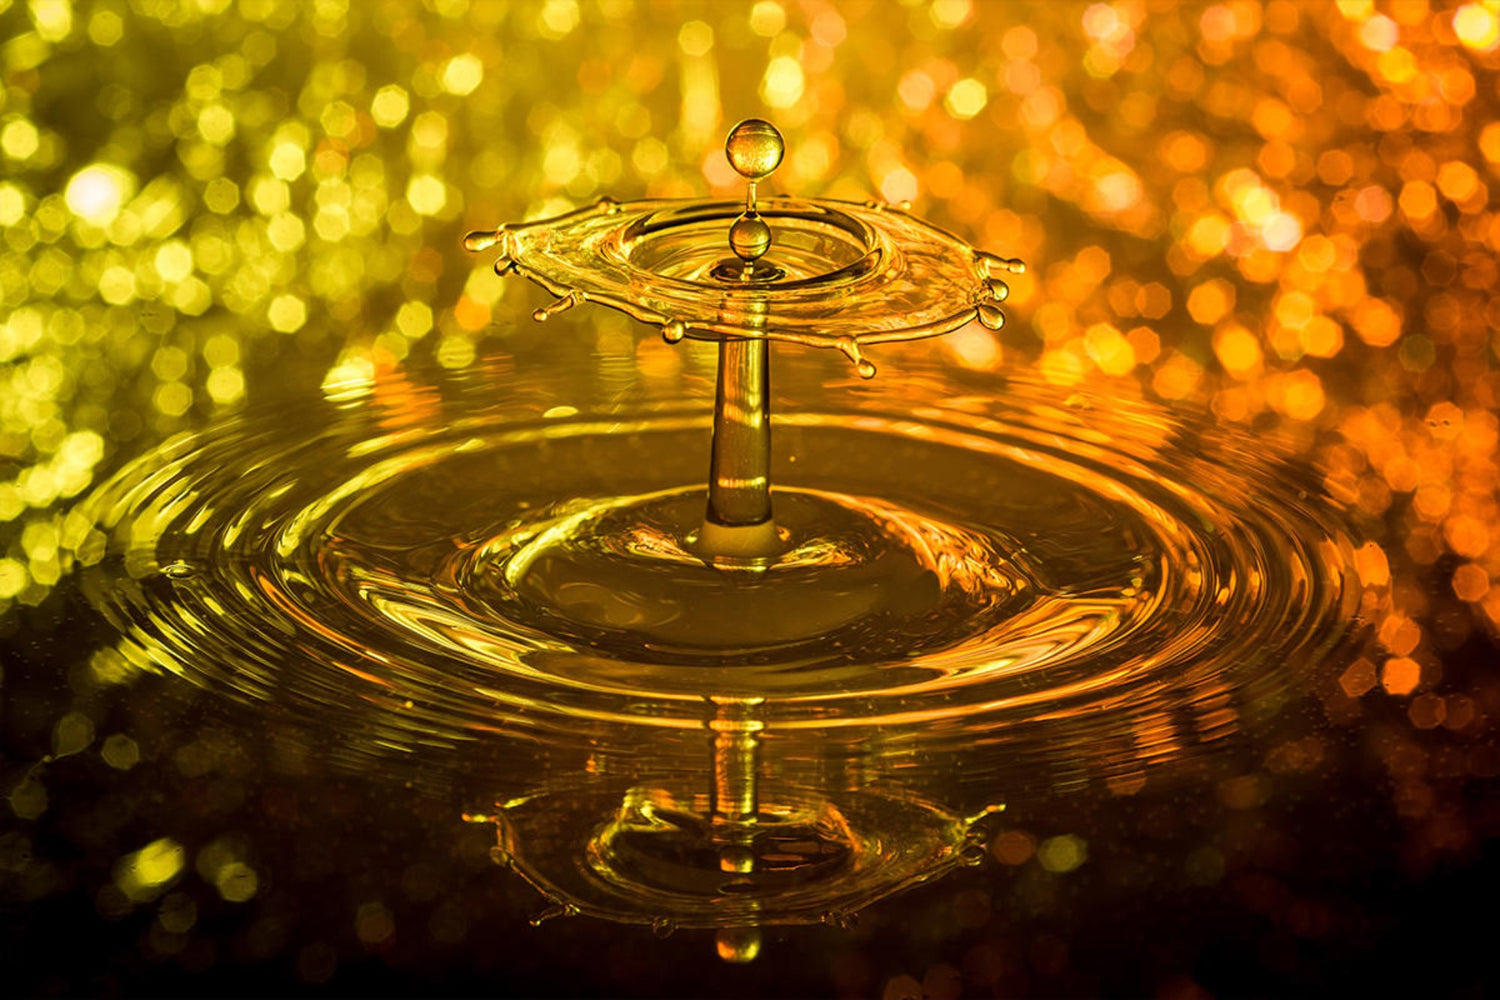 Seven Creative Ideas for Water Drop and Splash Photography